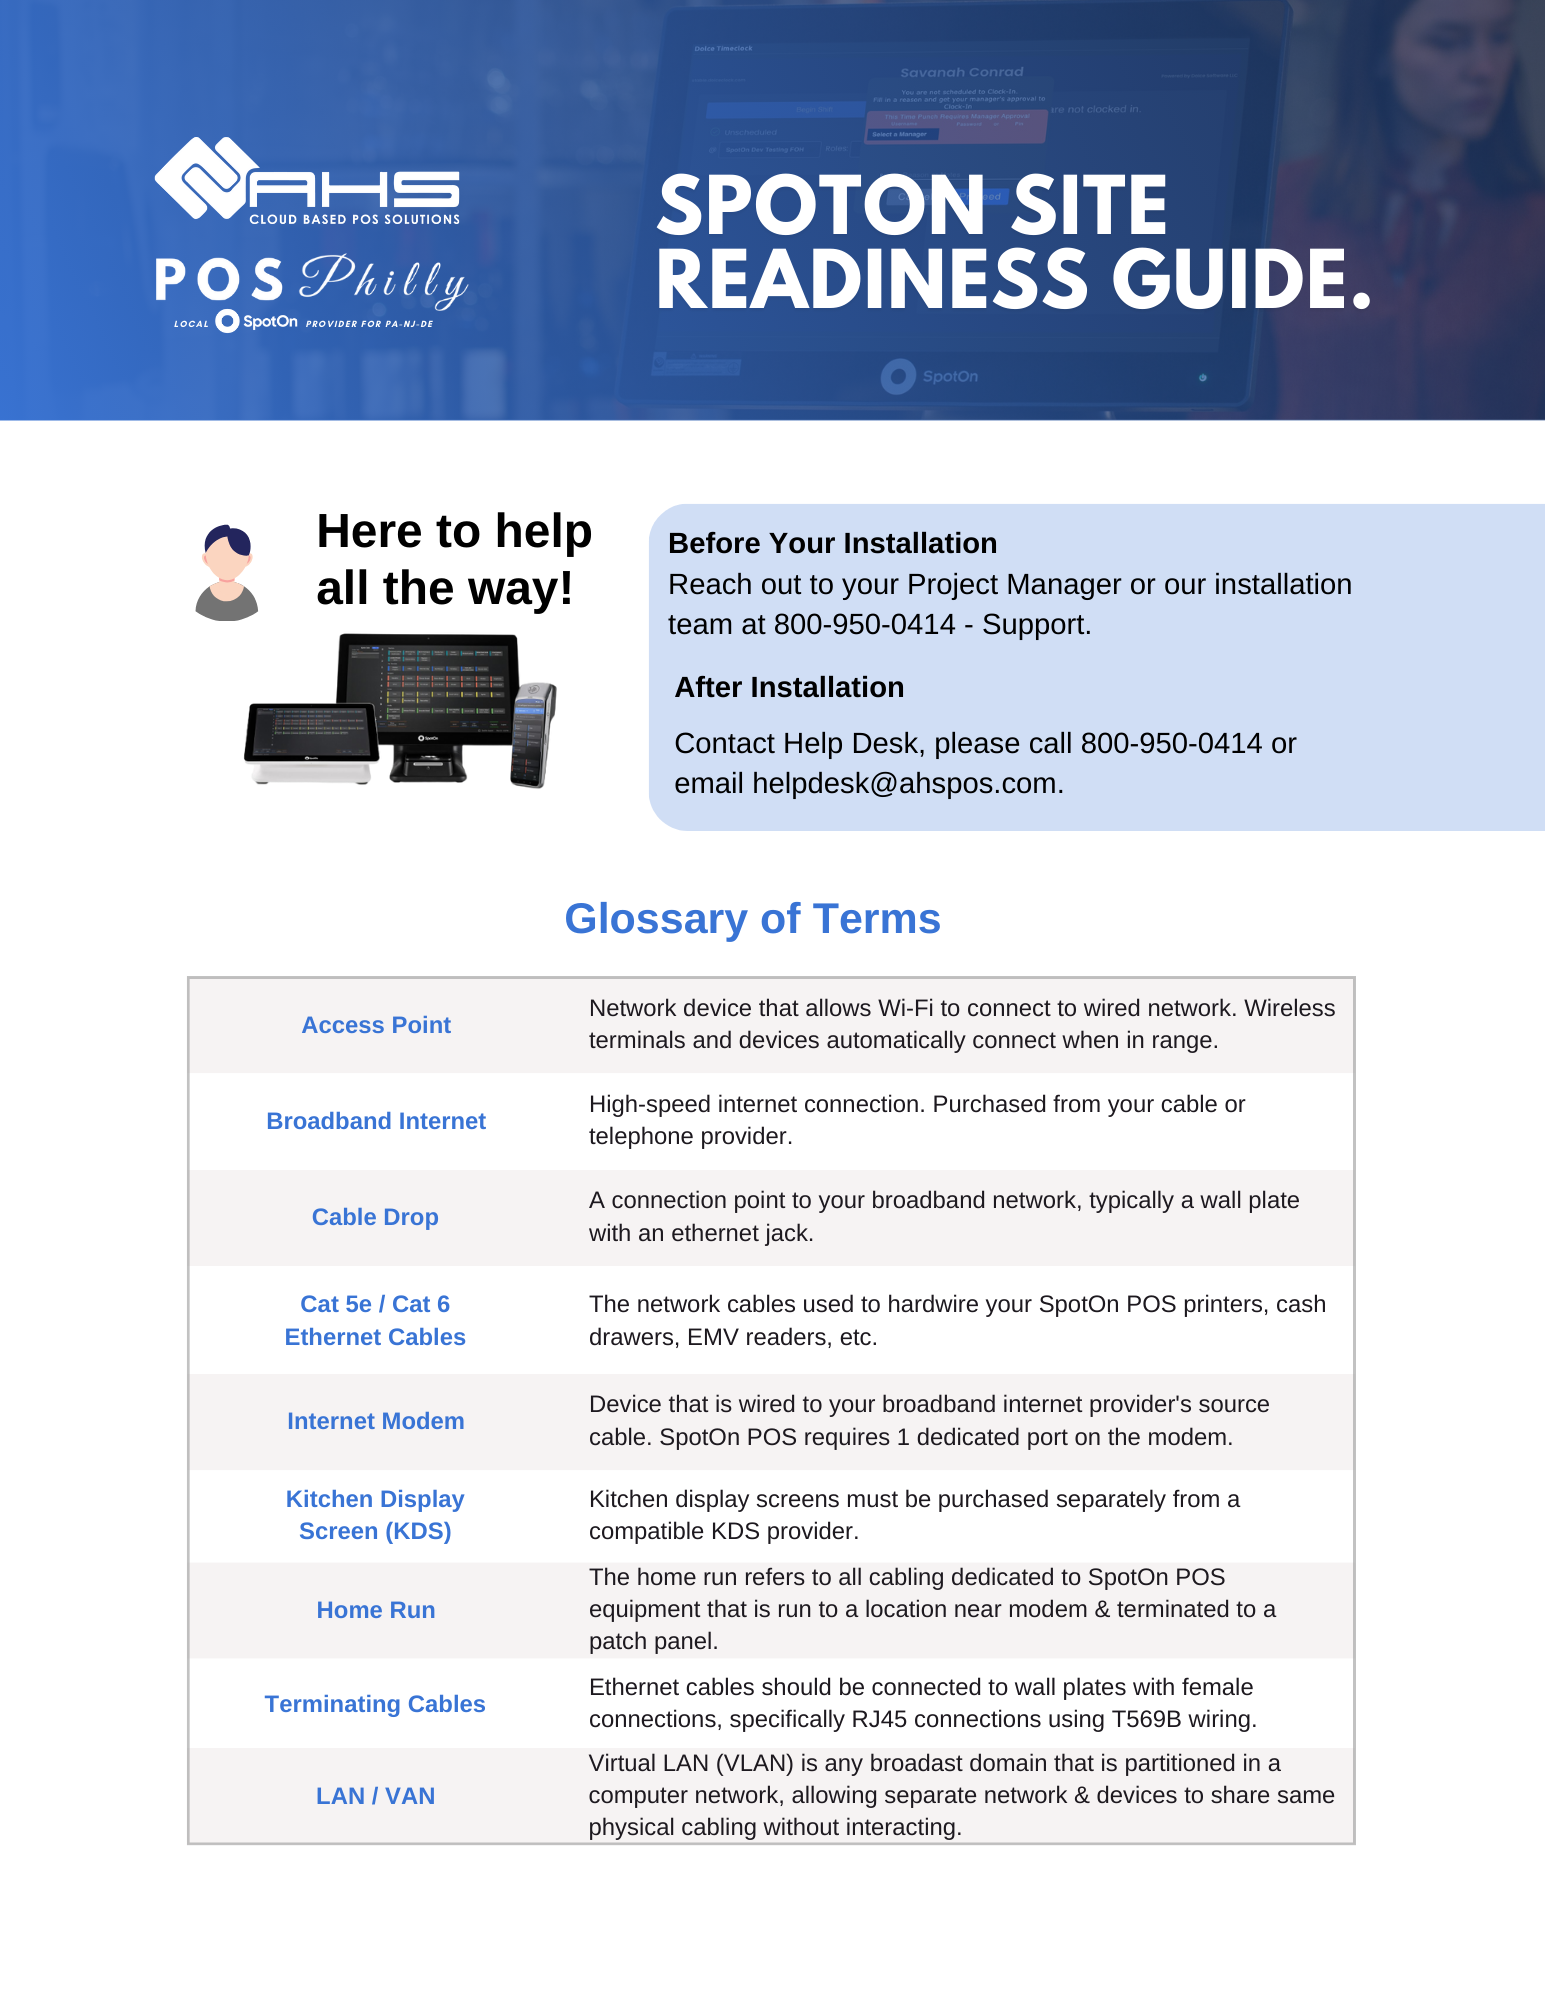 spoton pos site readiness guide page 5